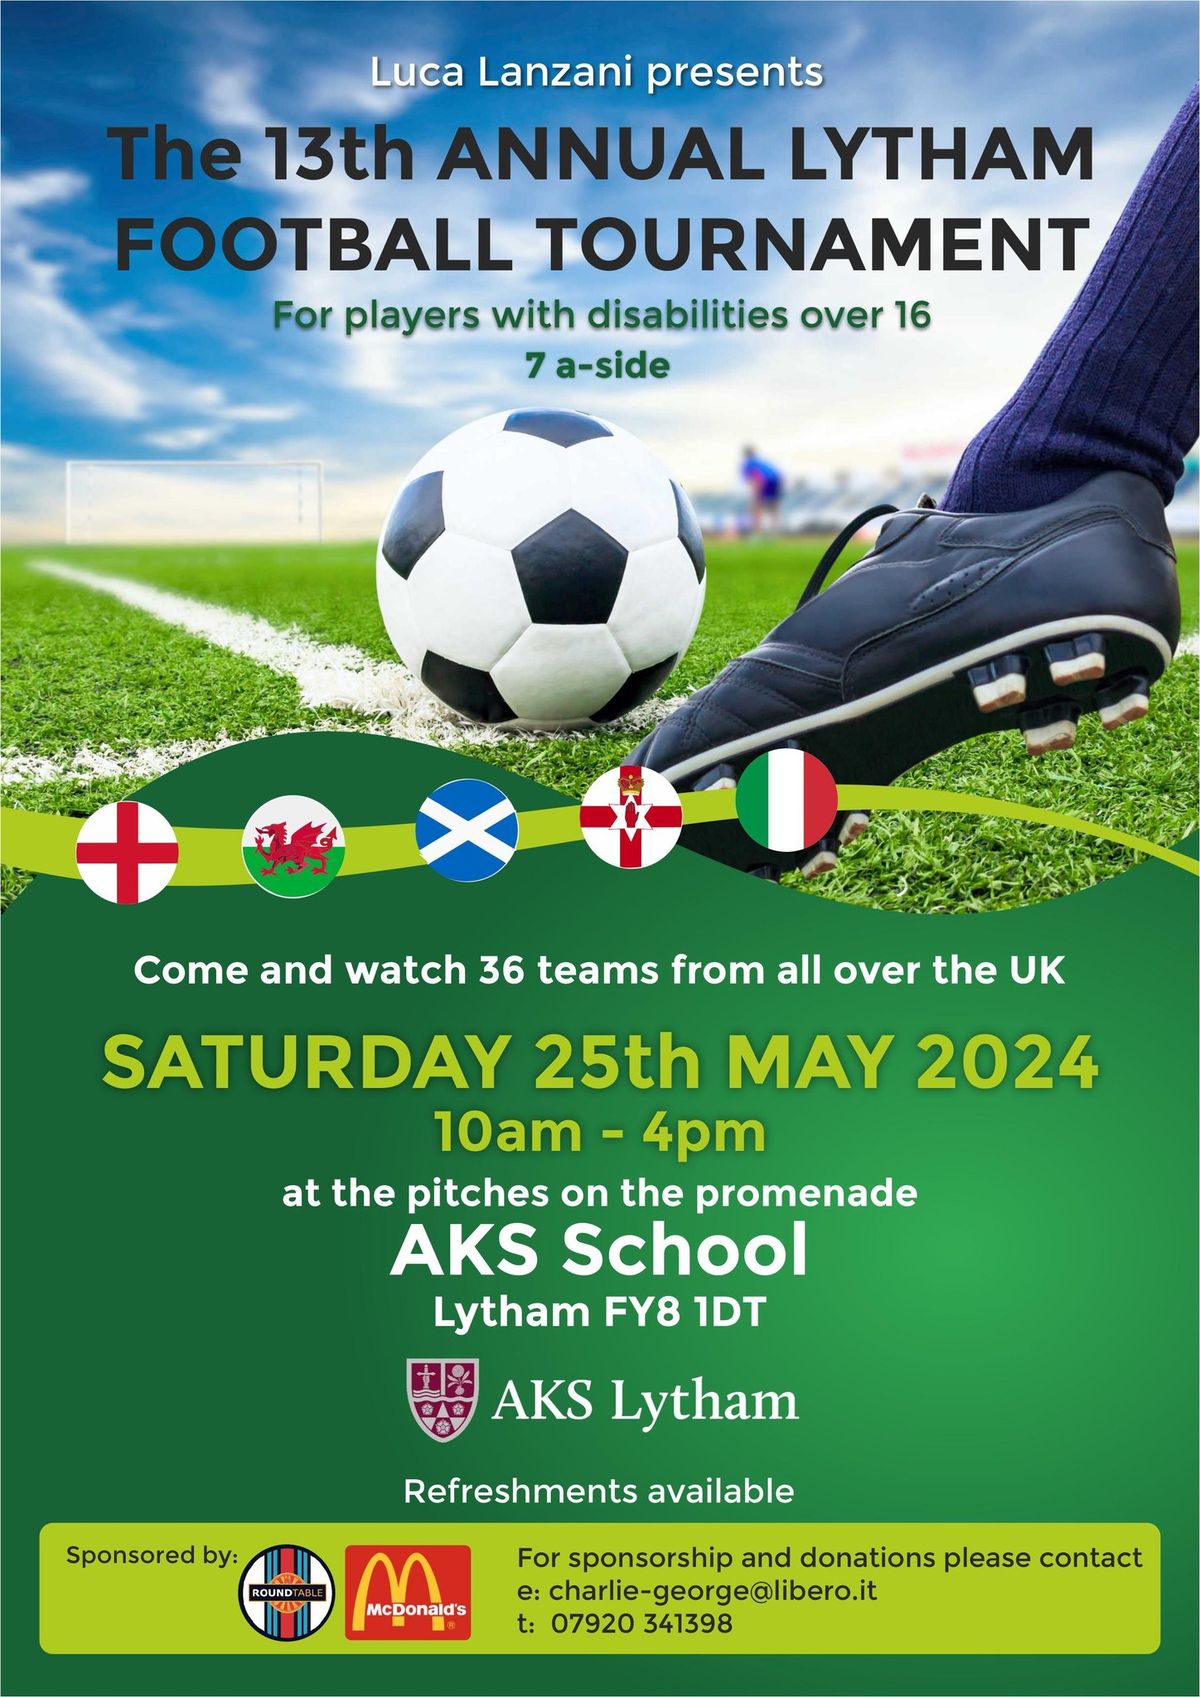 13th Annual Lytham Football Tournament - for players with disabilities over the age of 16